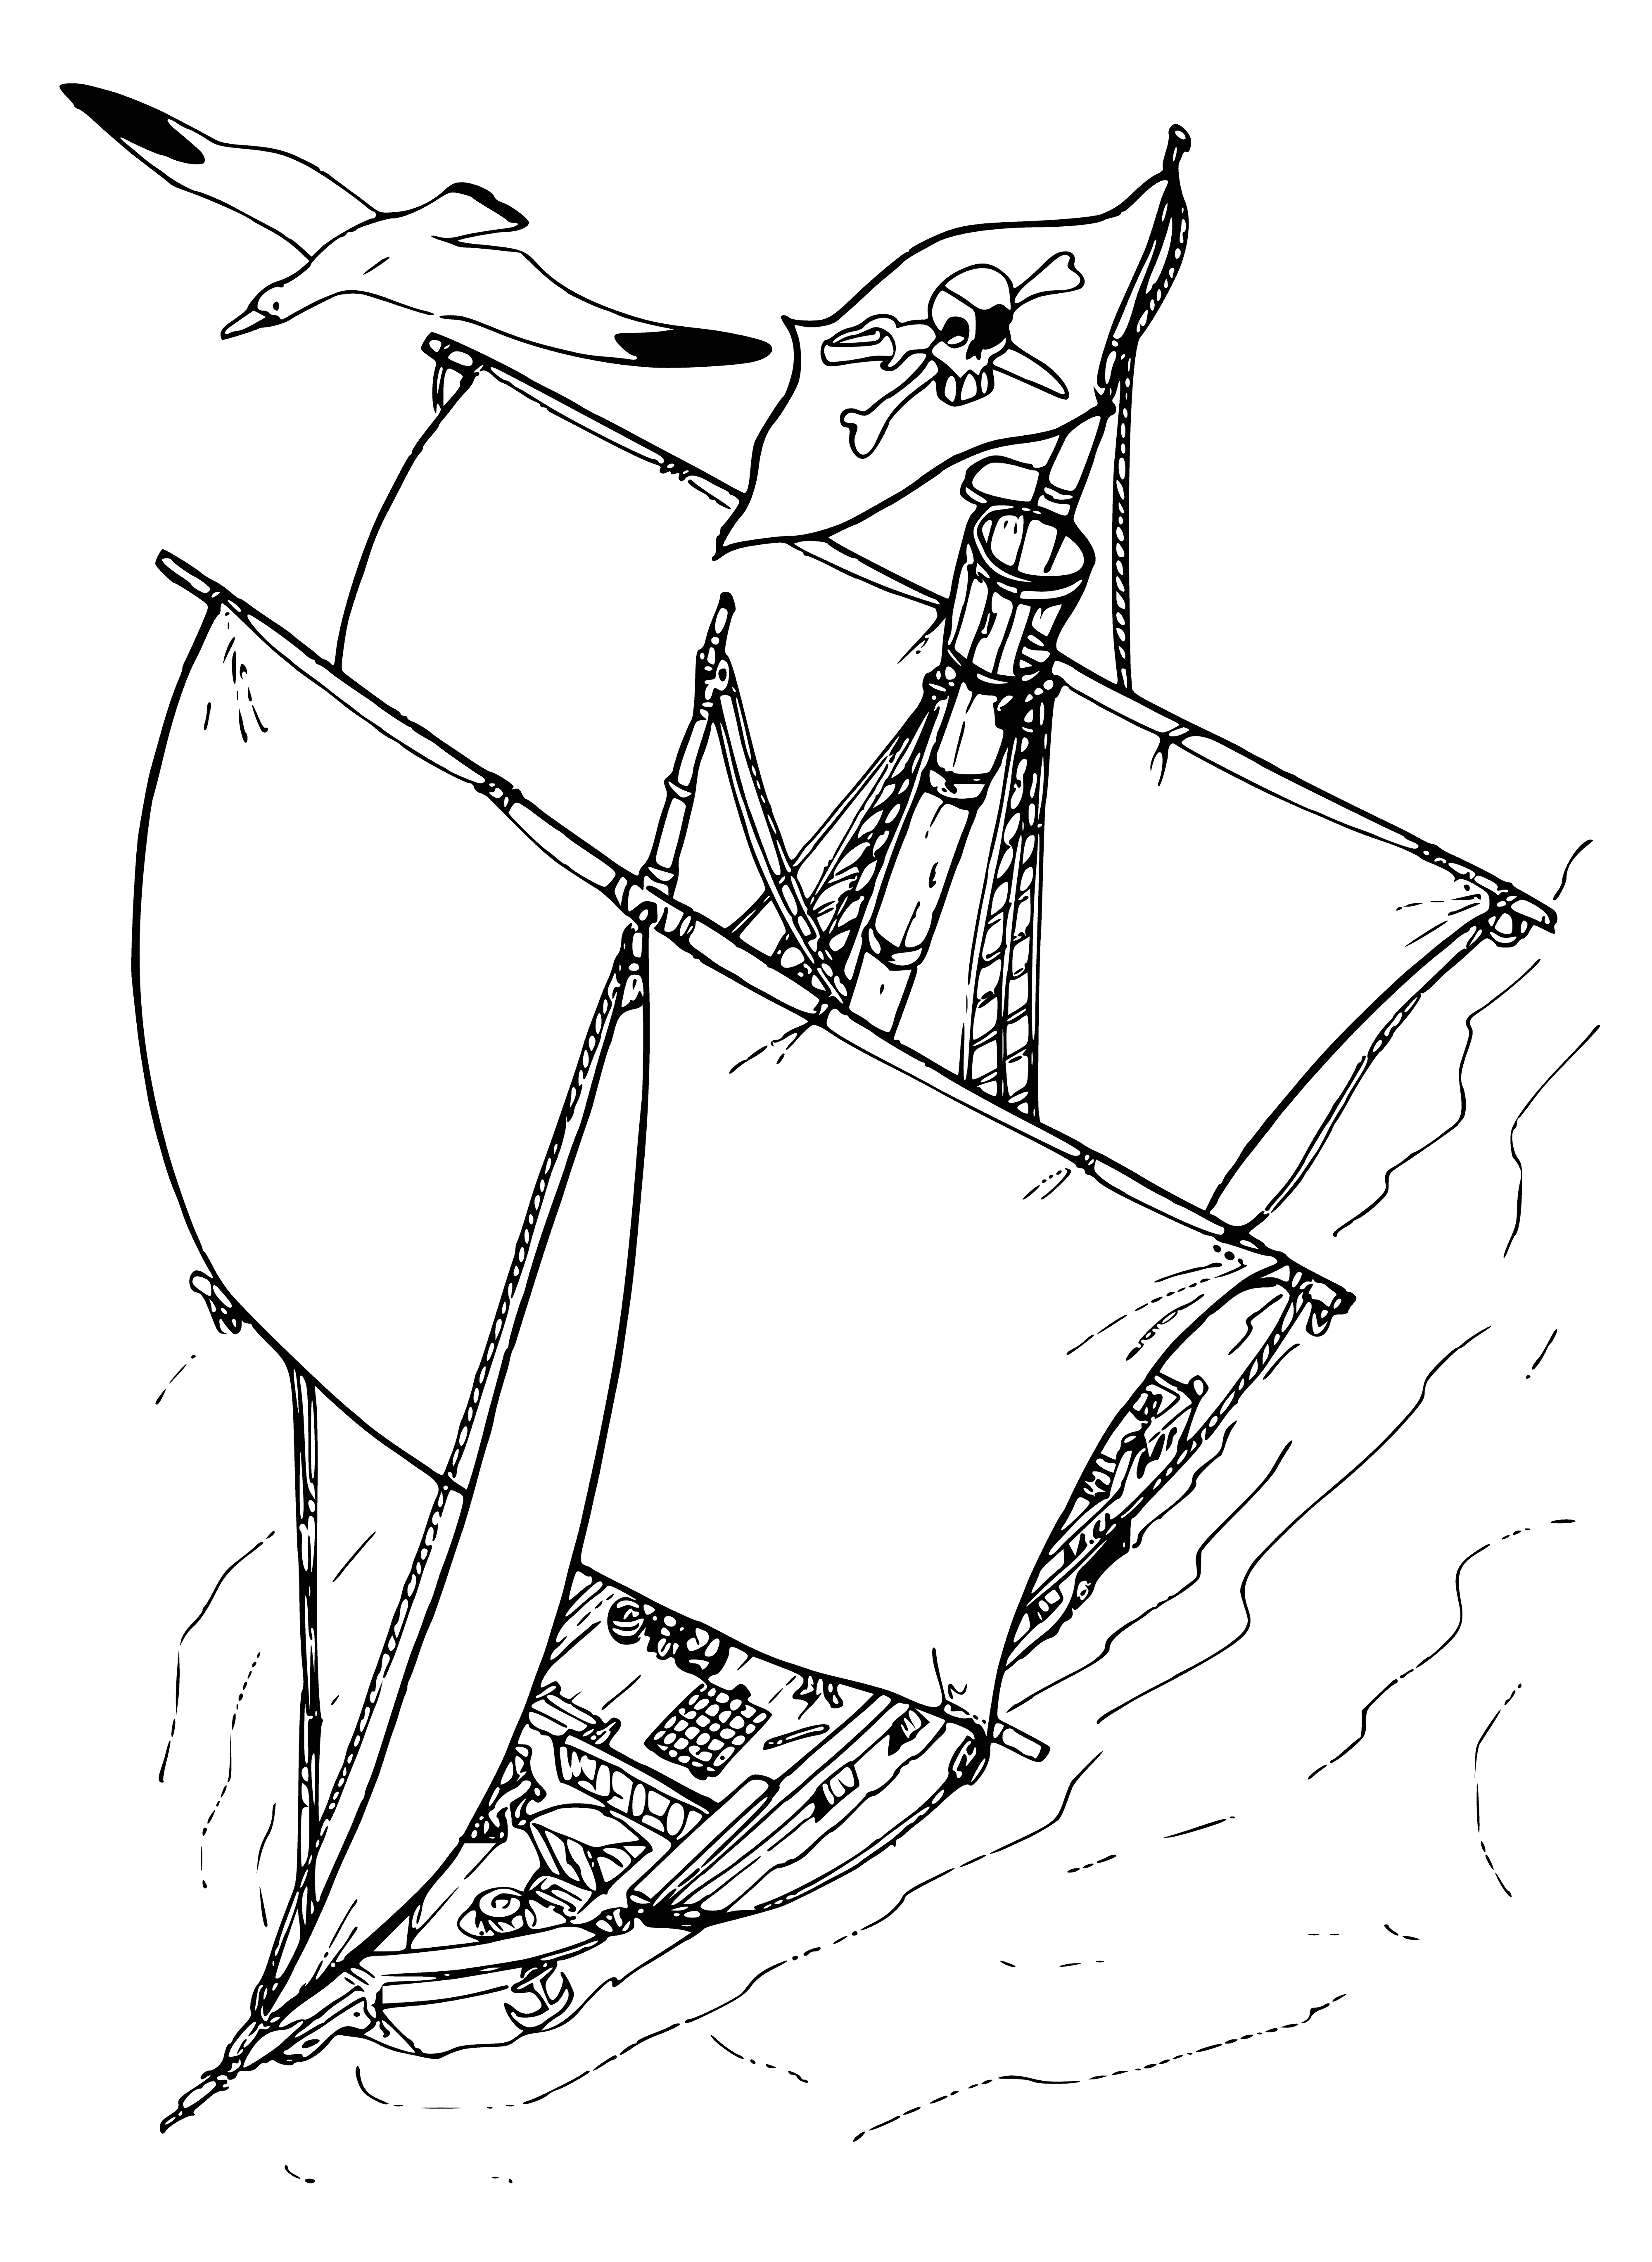 coloring page: A large ship with 3 masts & skull & crossbones flags has a large hole in its side, docked in a bay.